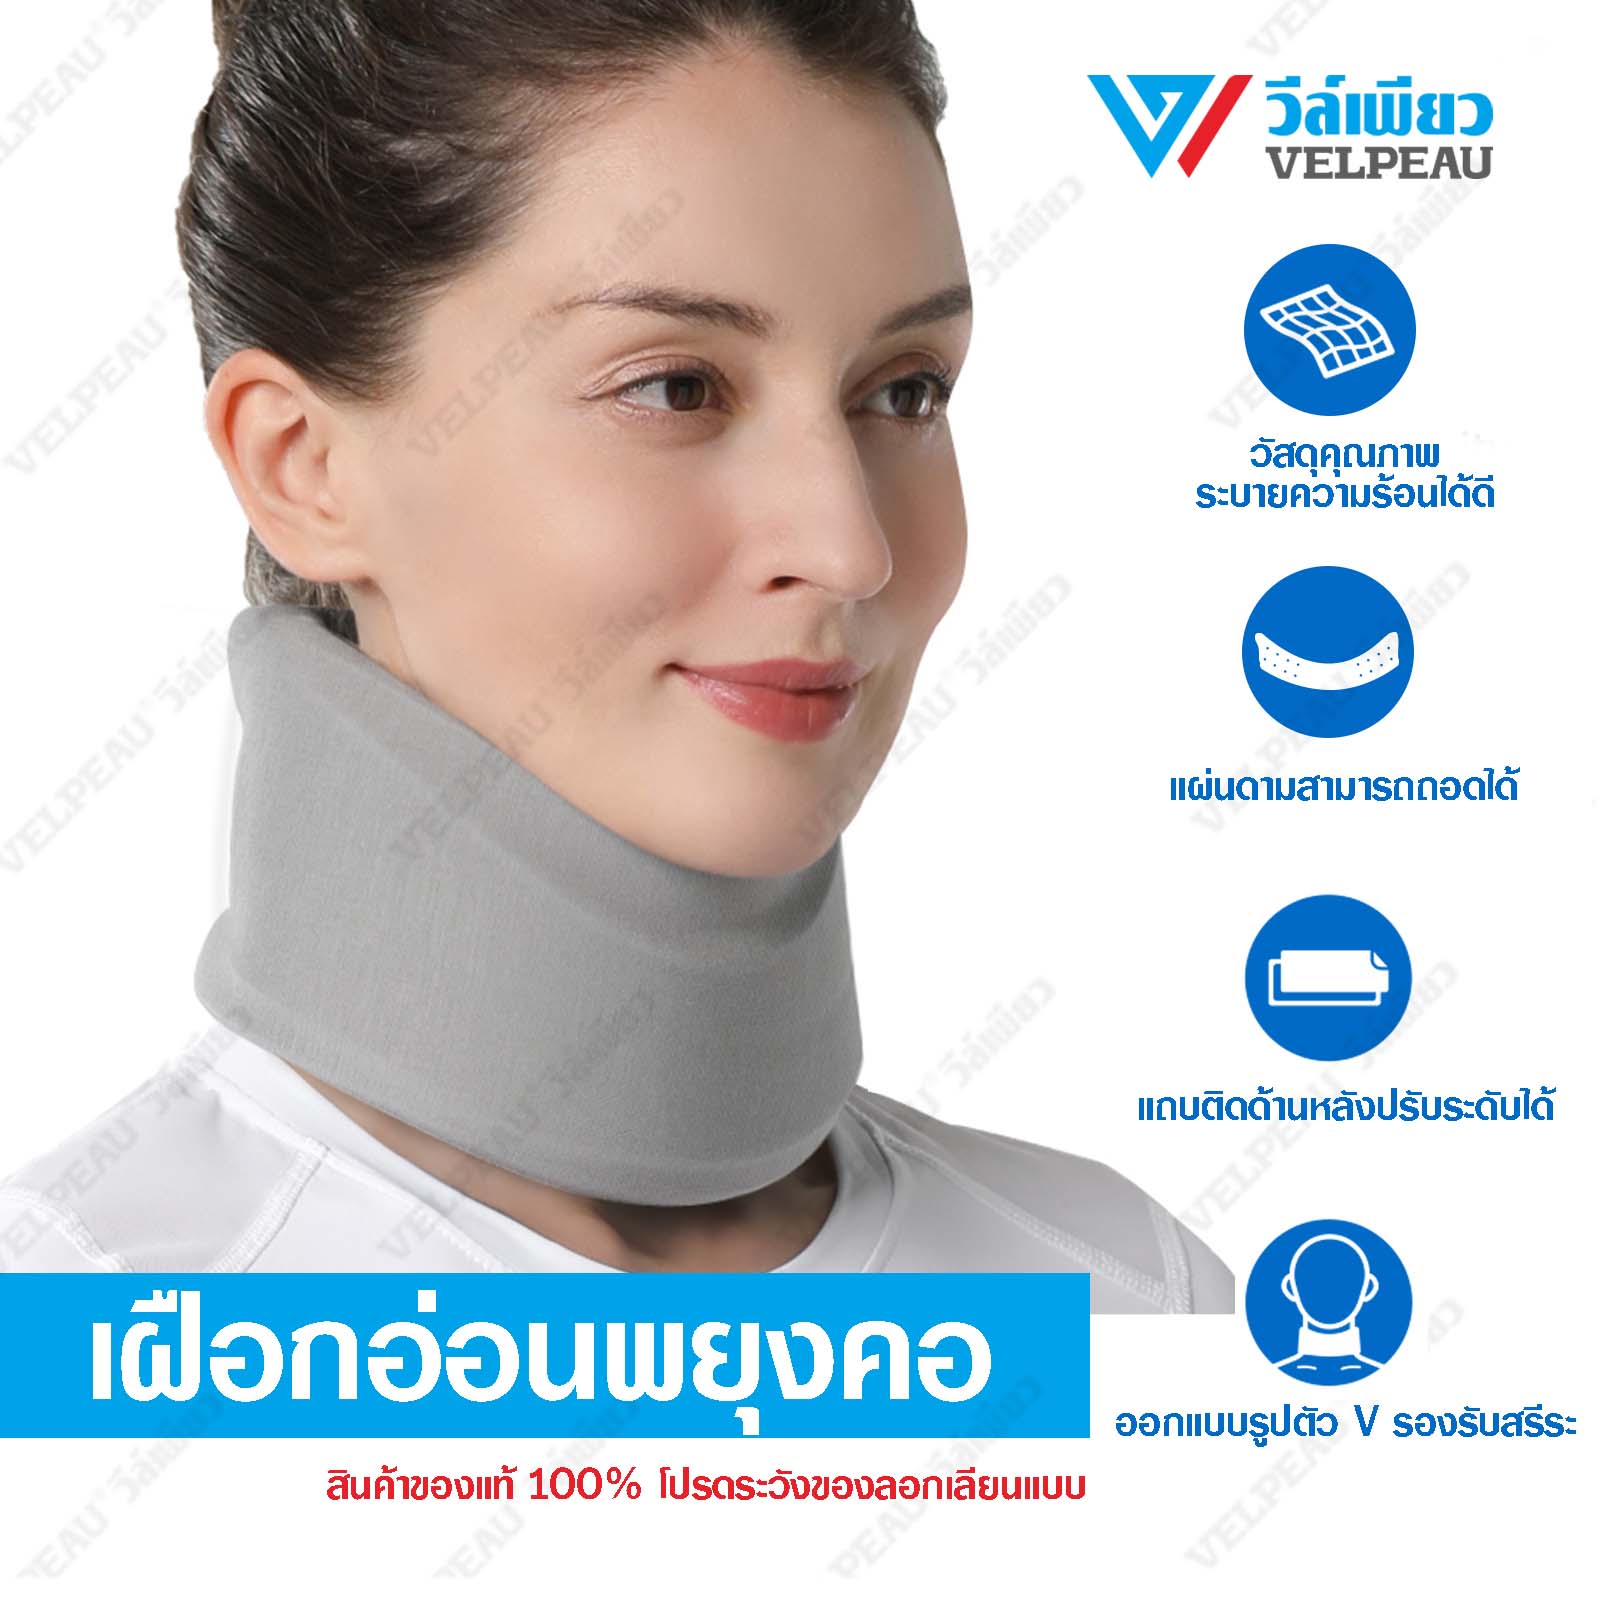 VELPEAU Neck Brace -Foam Cervical Collar - Soft Neck Support Relieves Pain  & Pressure in Spine - Wraps Aligns Stabilizes Vertebrae - Can Be Used